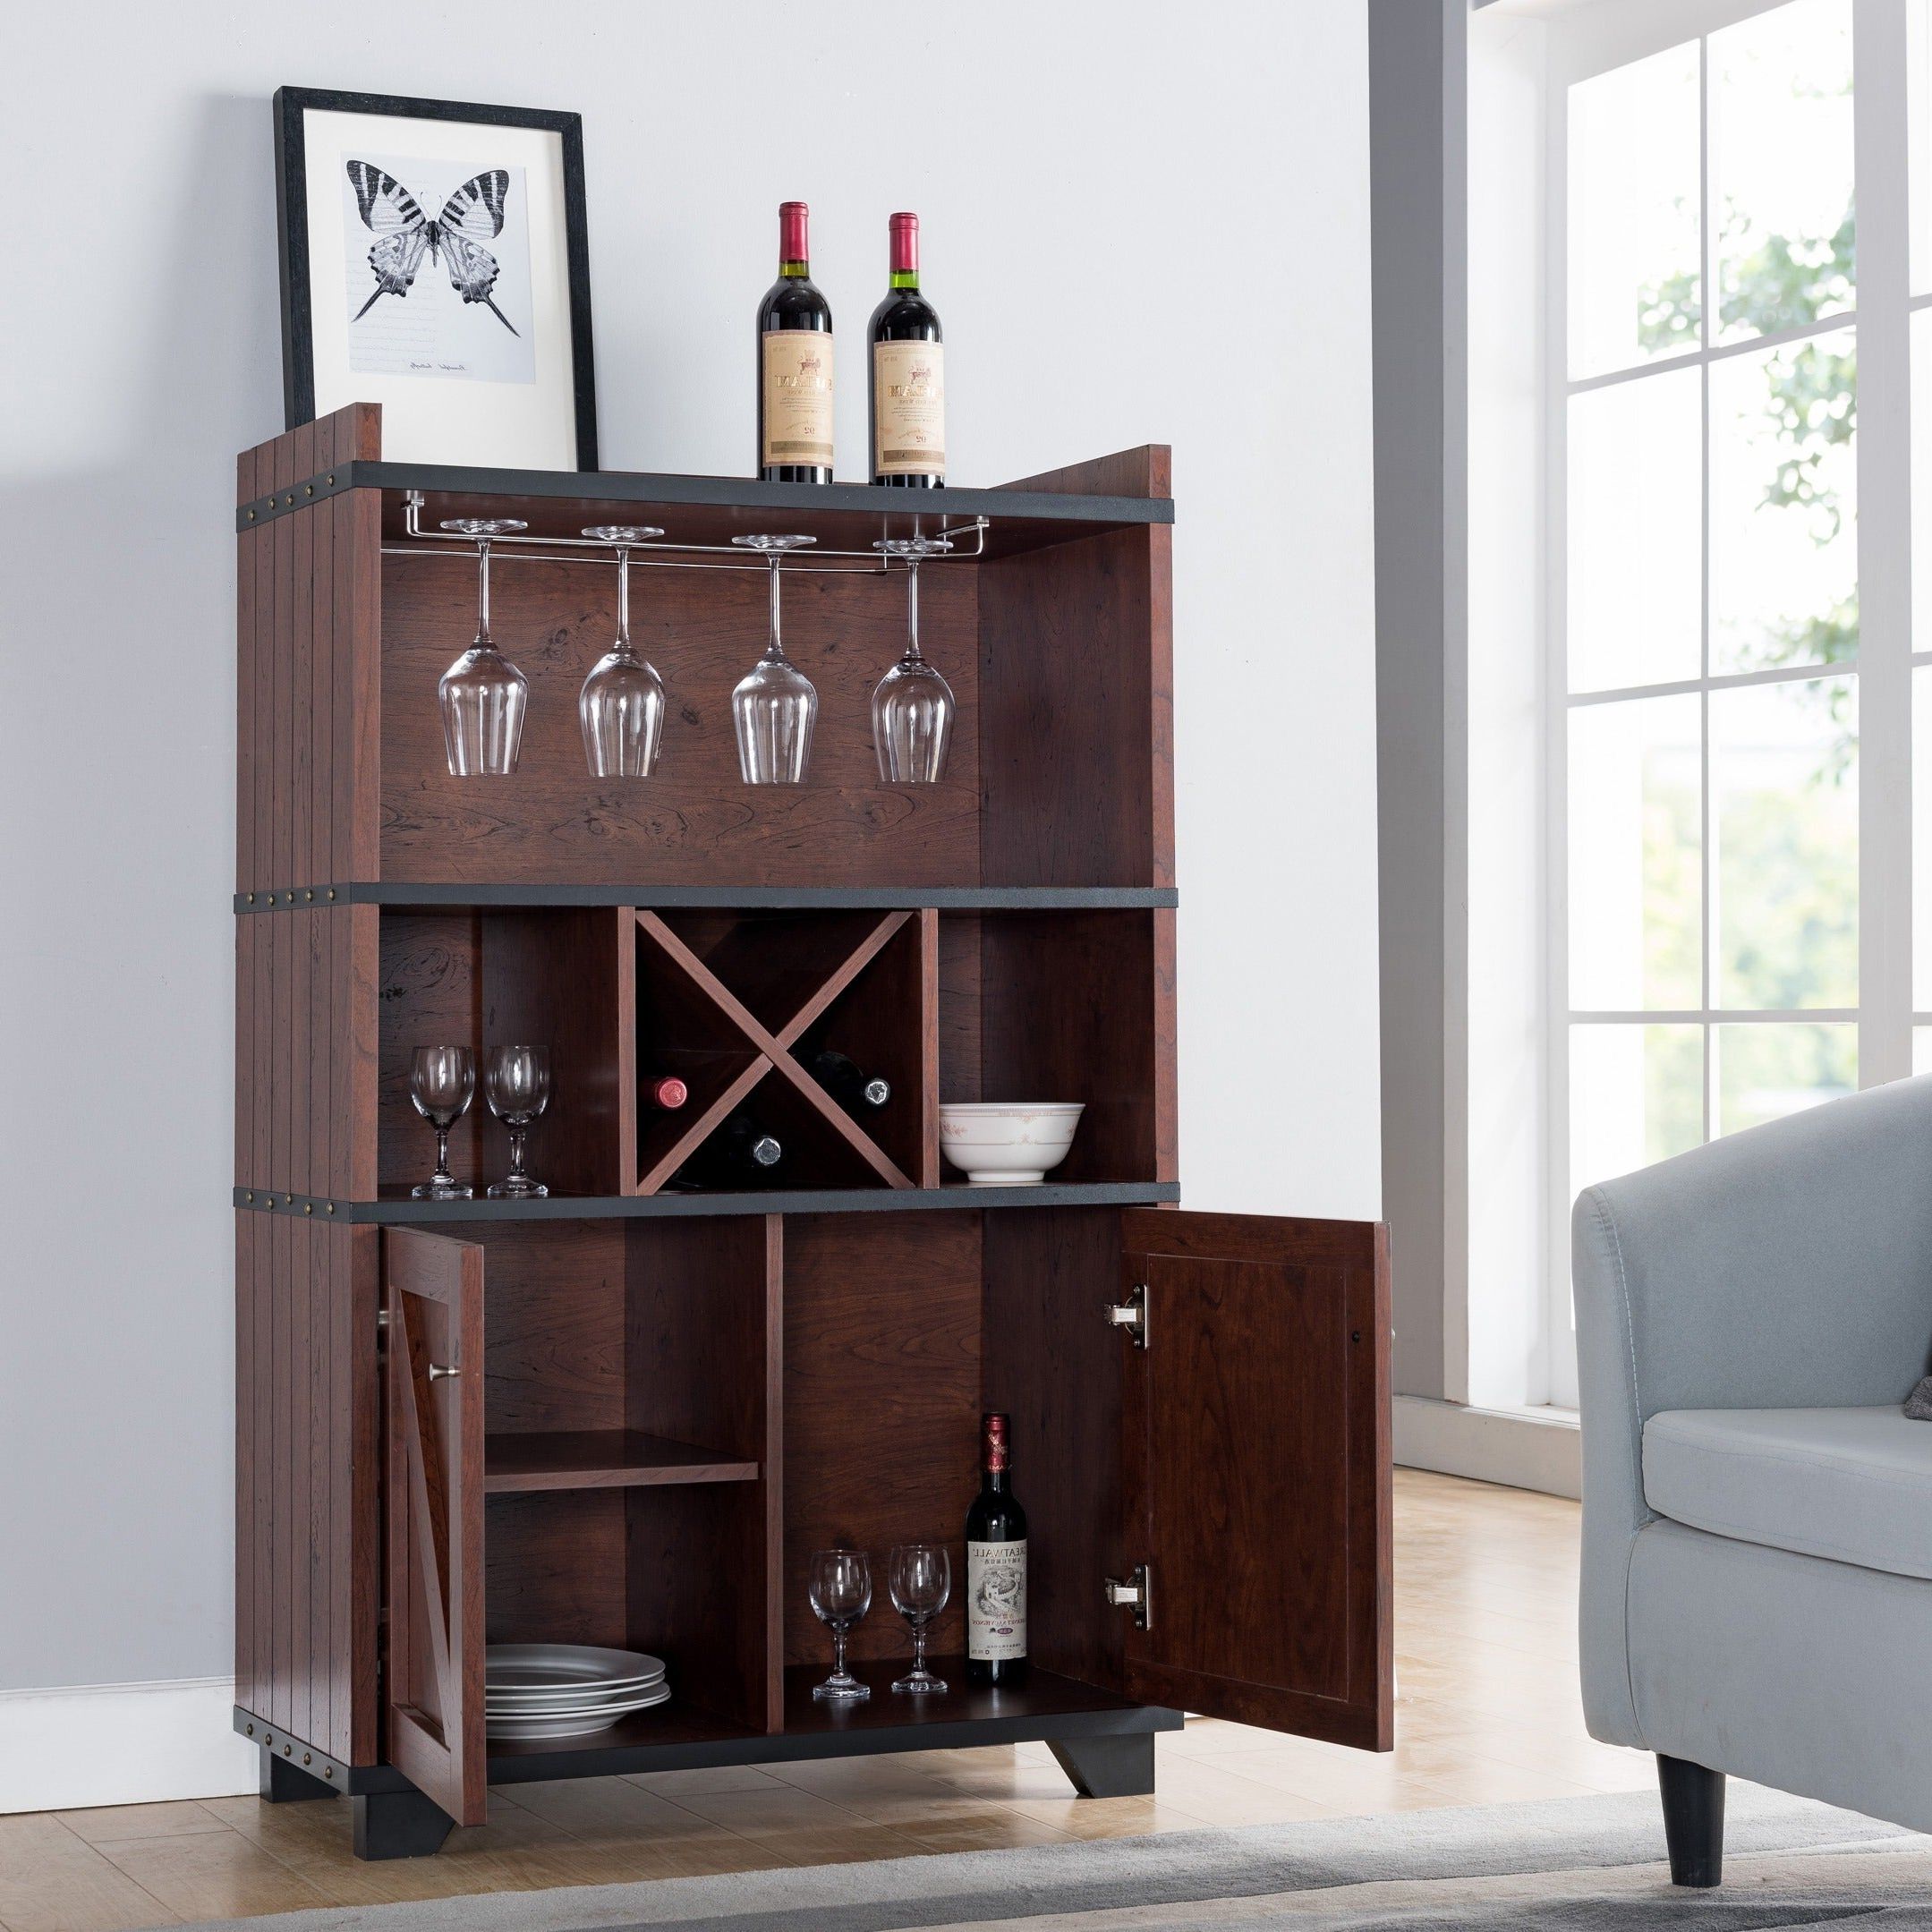 Furniture Of America Wesleyan Rustic Farmhouse Wine Cabinet Buffet Intended For Wooden Buffets With Two Side Door Storage Cabinets And Stemware Rack (View 3 of 20)